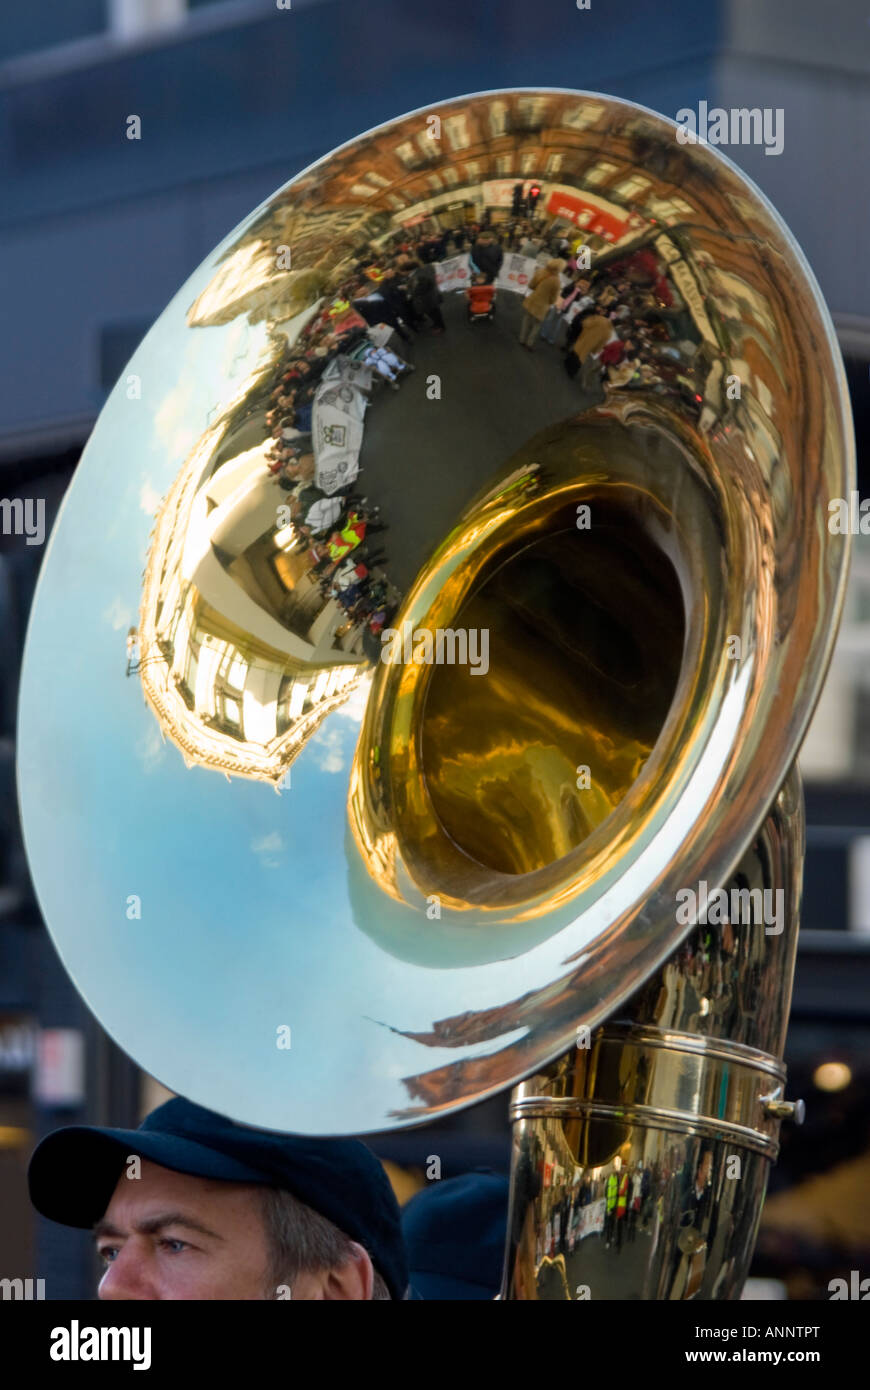 Vertical close up of the bell of a huge sousaphone aka marching tuba, being played by a man in a marching brass band. Stock Photo